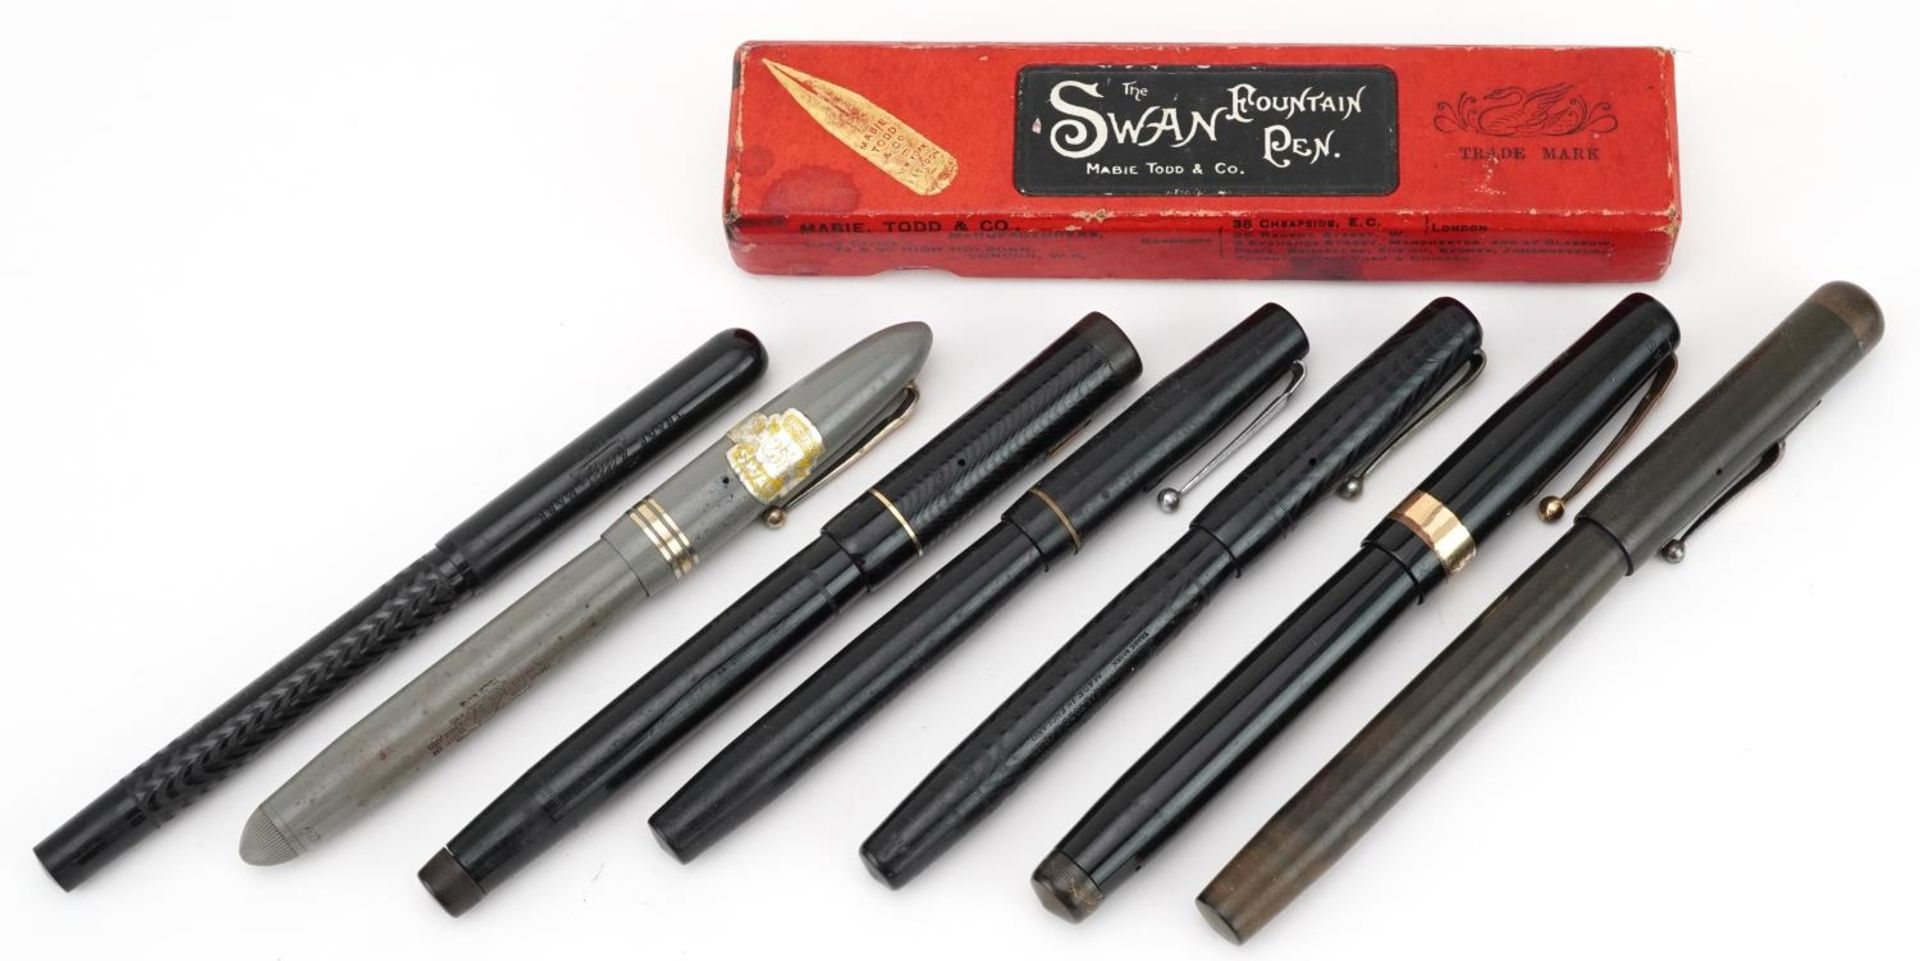 Seven vintage Swan self-filler or Leverless fountain pens, five with gold nibs, one with box : For